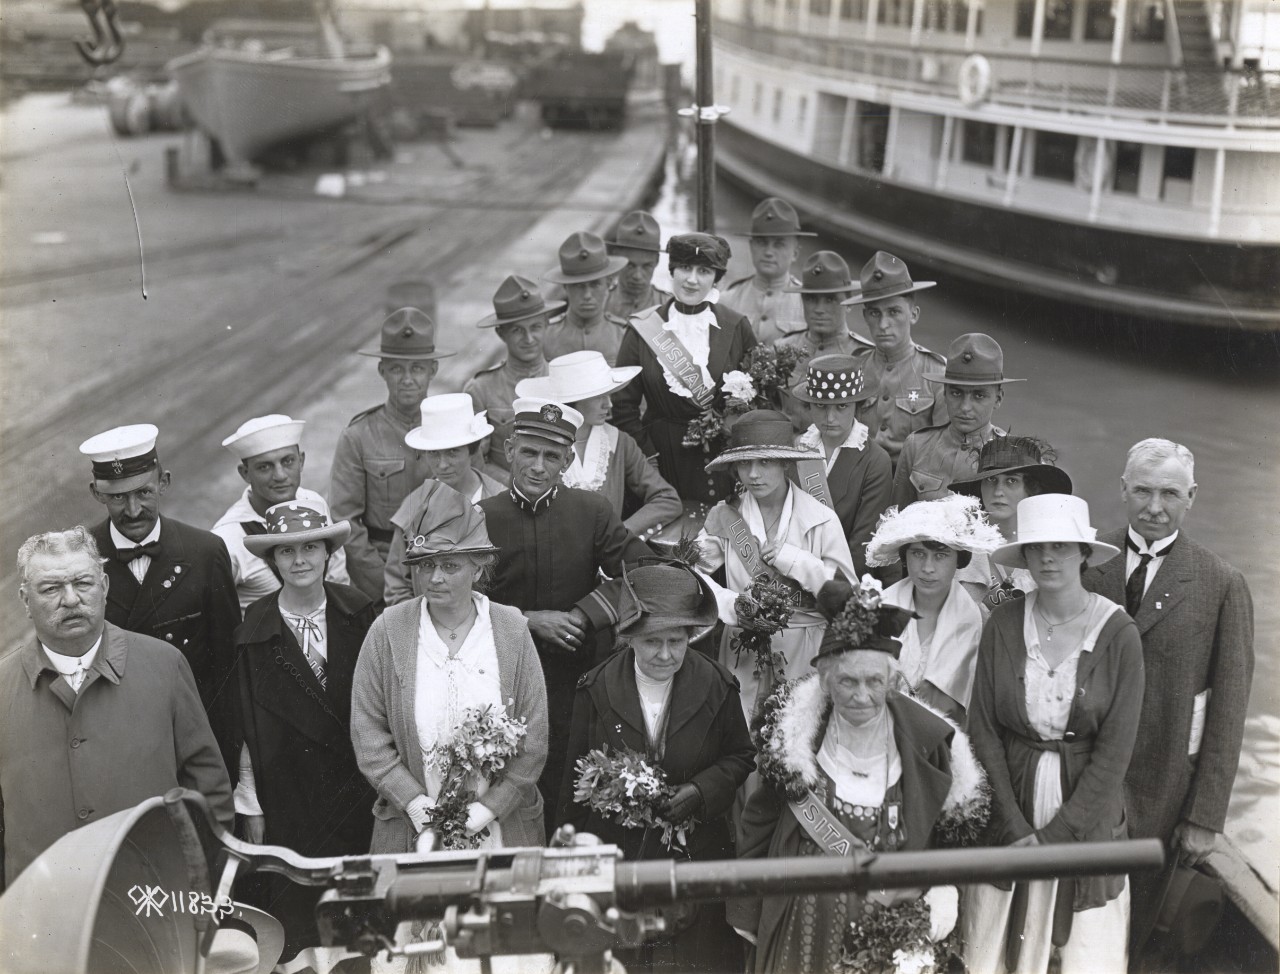 Those involved in the ceremonies honoring the dead of the Great War gather on Wicomico’s forecastle at the Washington Navy Yard, 30 May 1918, in this image captured by Lt. E. M. de Barri. Those present include Mrs. Mary Lockwood (Honorary Chaplai...